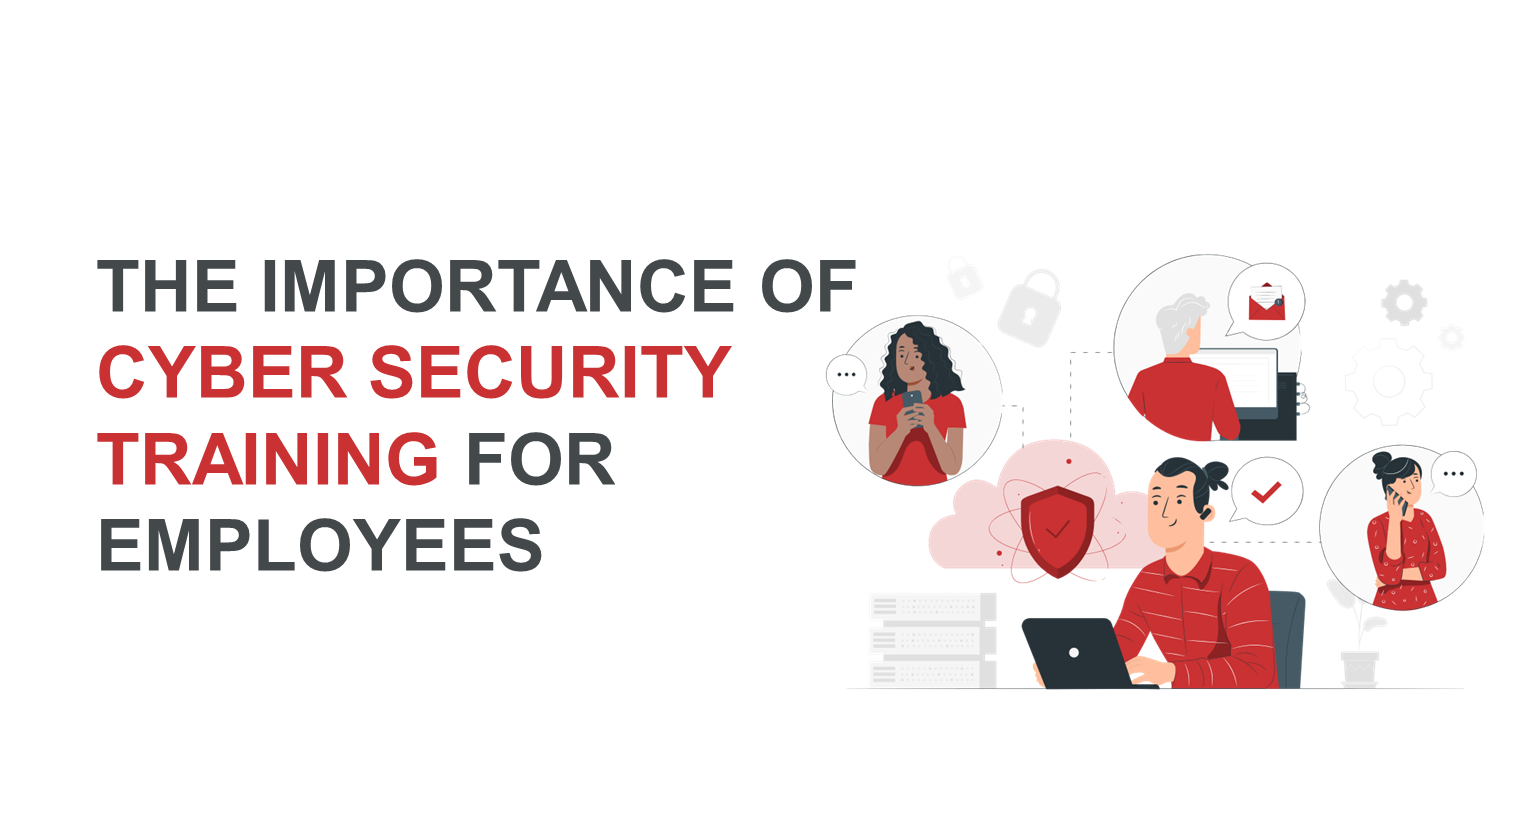 The Importance of Cyber Security Training for Employees